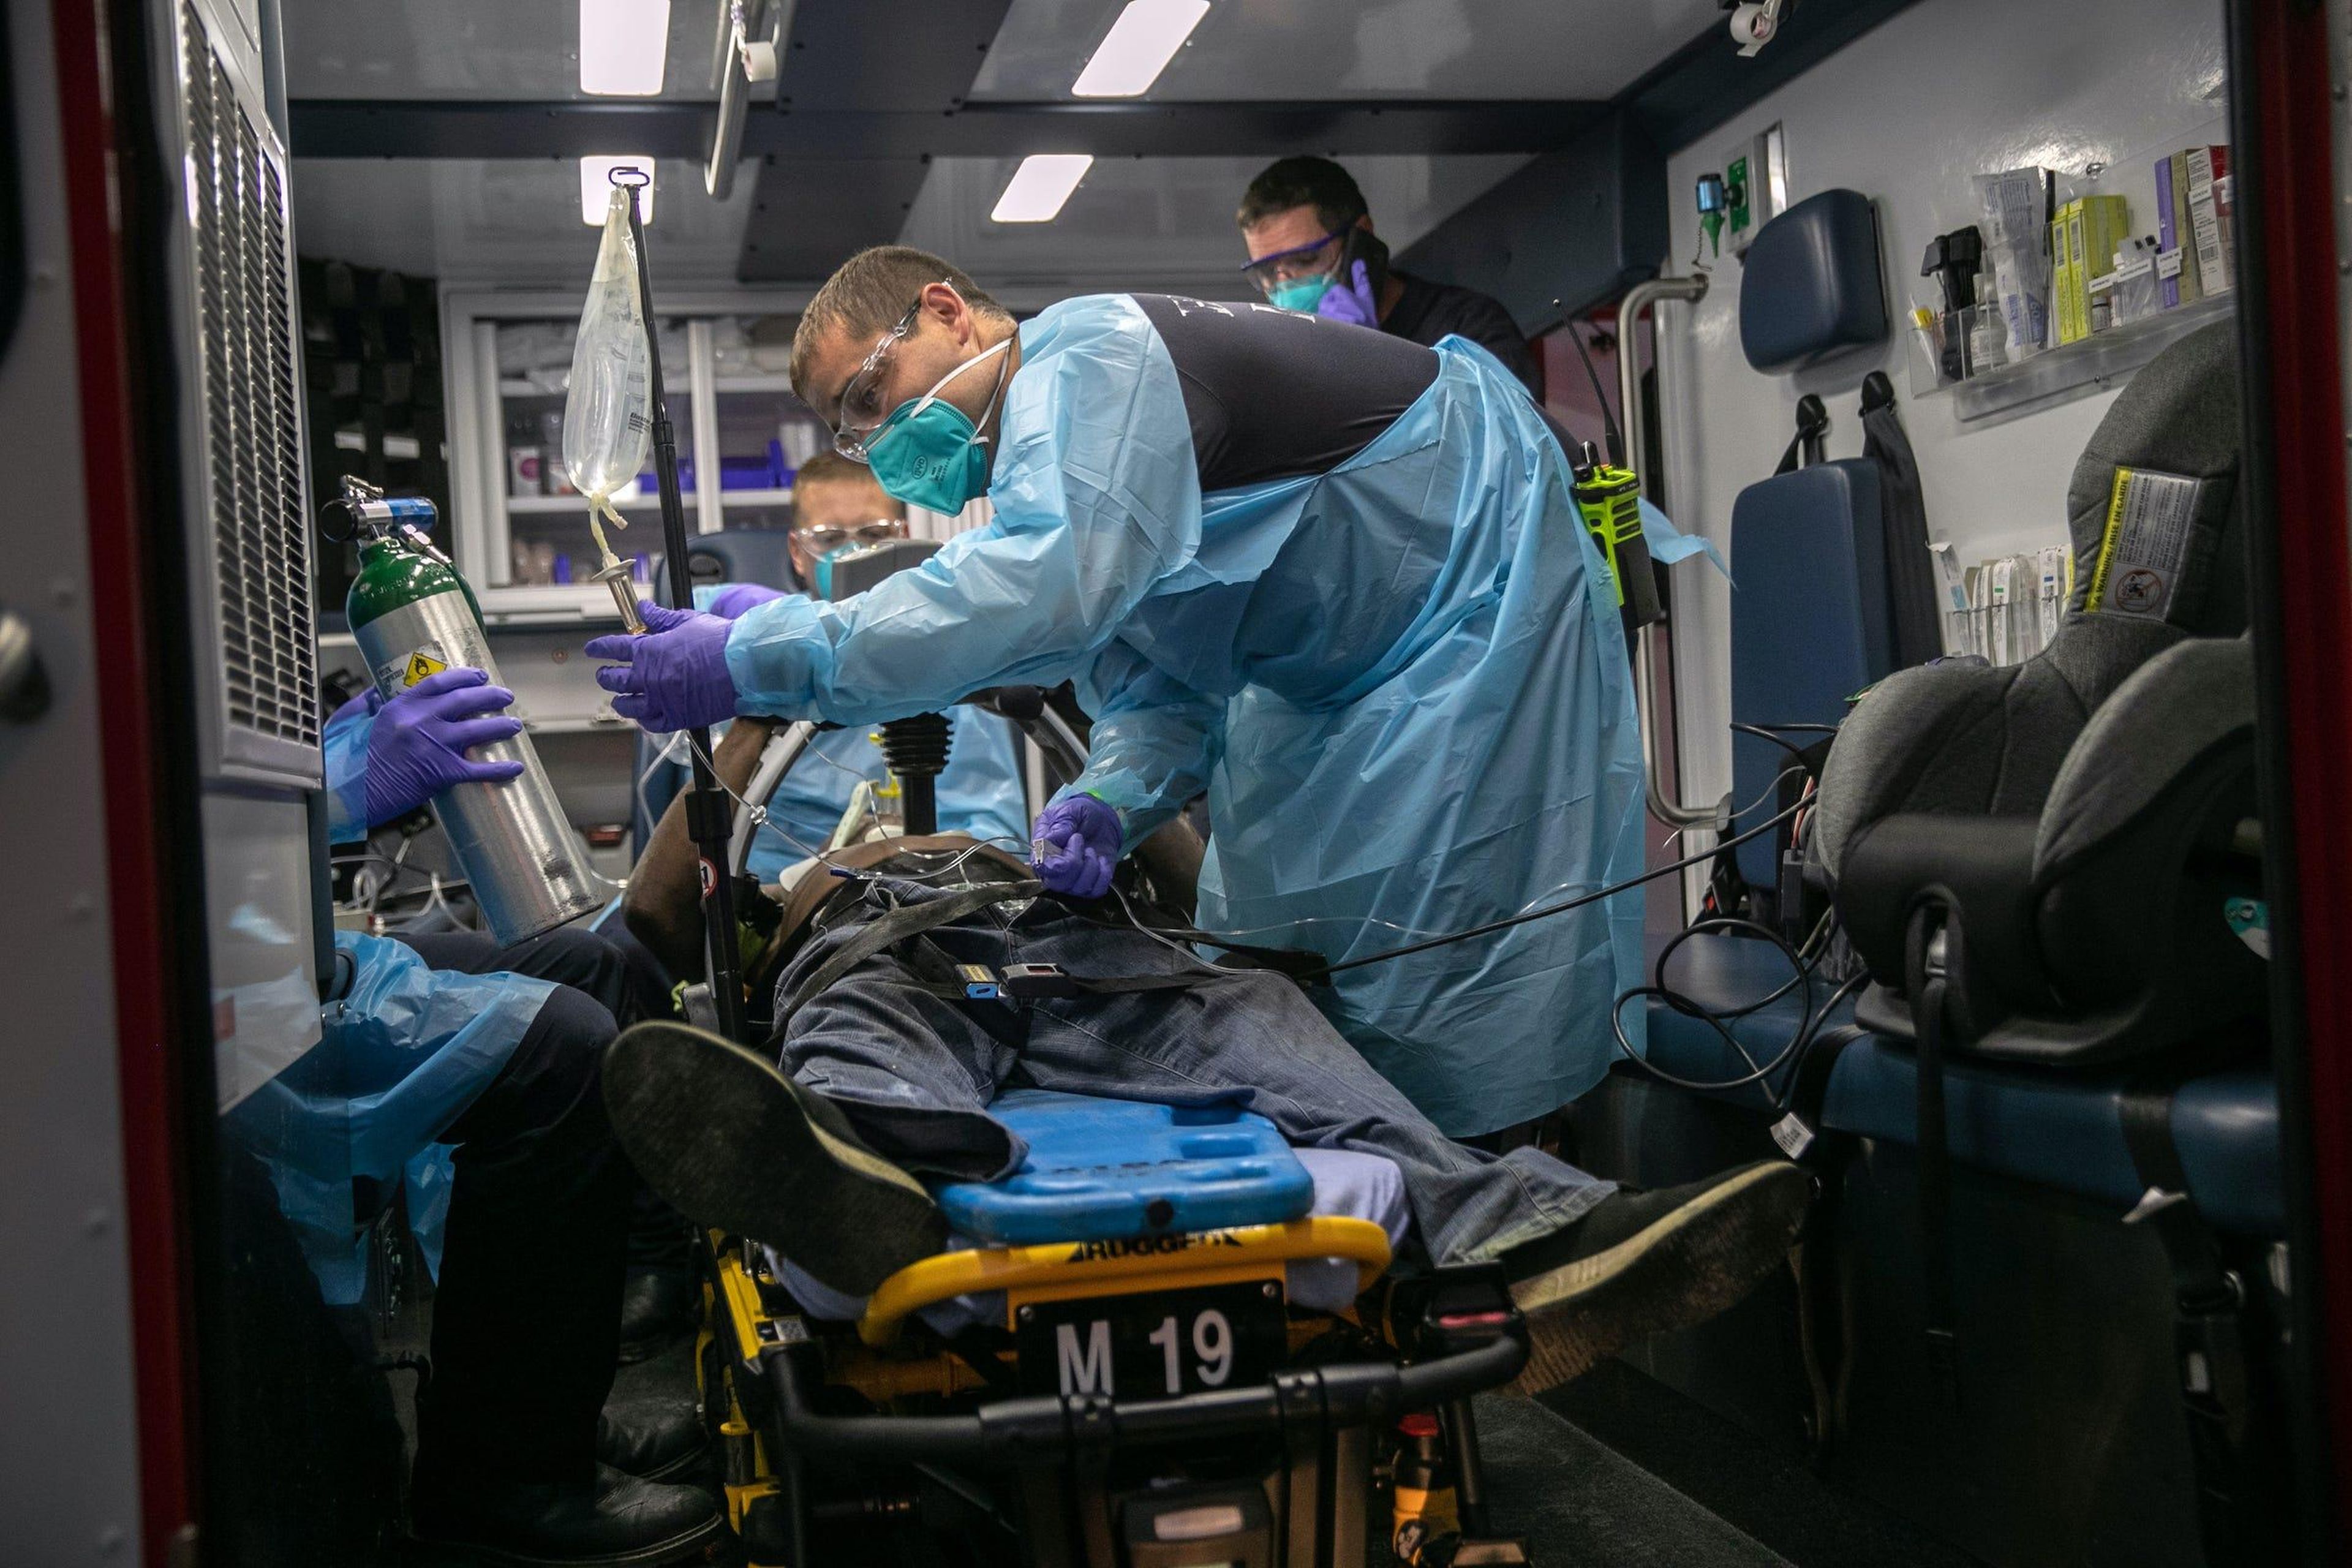 Houston Fire Department medics transport a man to a hospital after he suffered cardiac arrest on August 11, 2020 in Houston, Texas. Heart failure is a frequent result of COVID-19. Firefighters and medics wear protective masks on all medical calls, whether